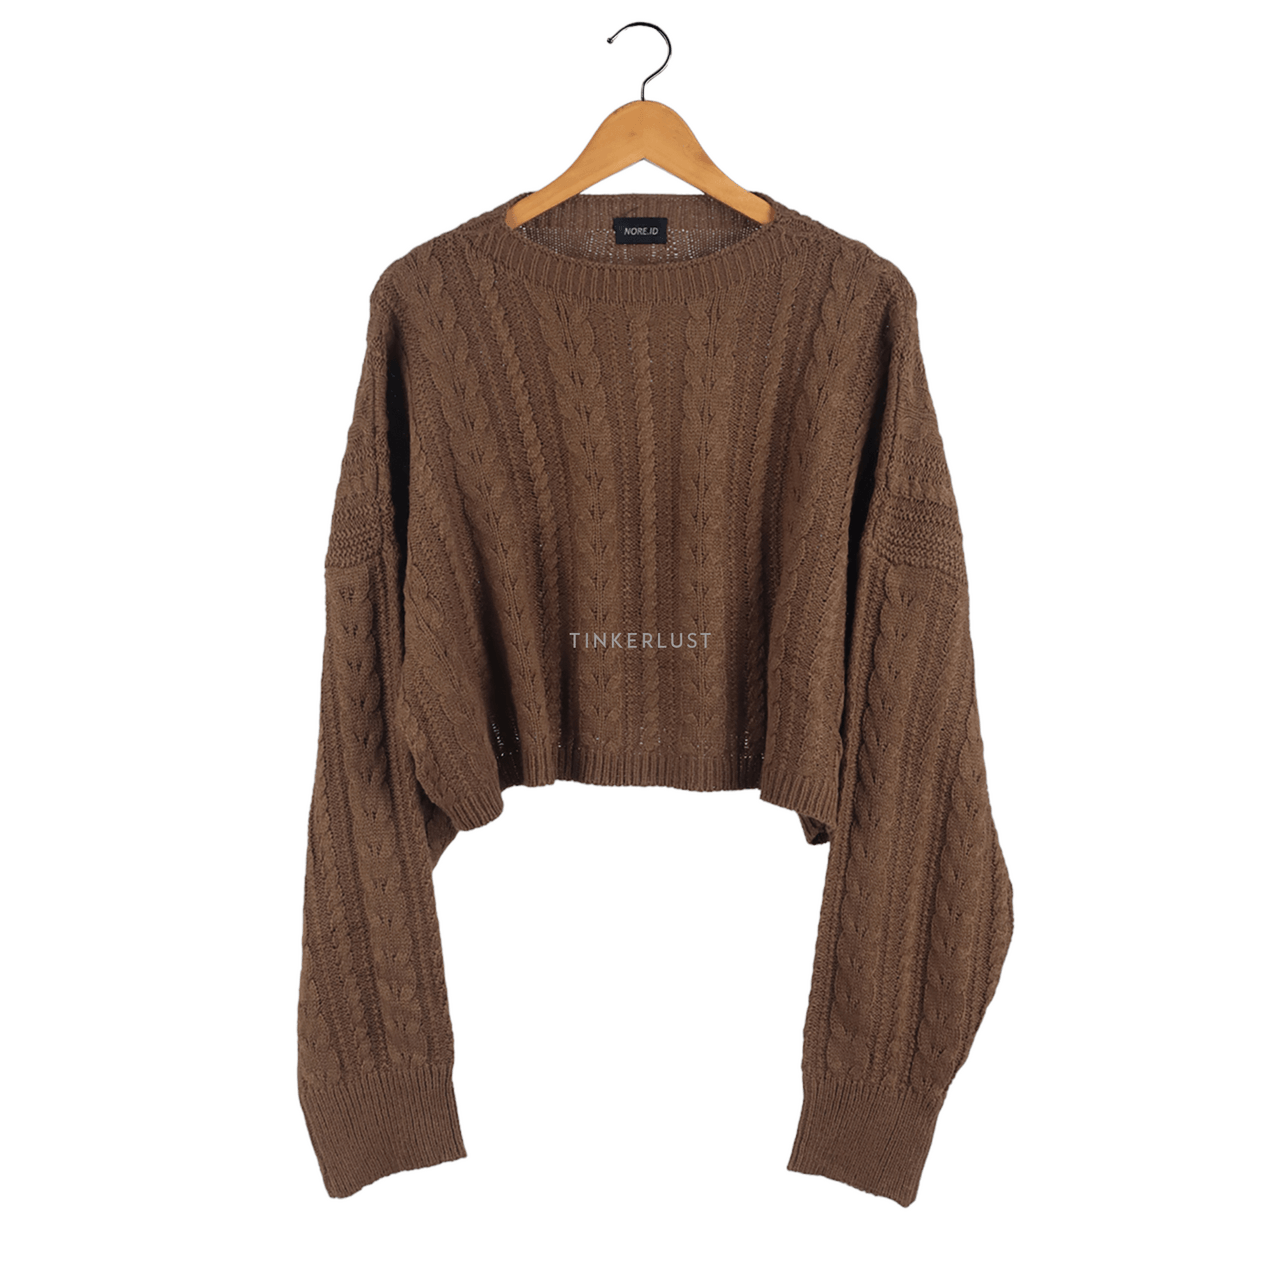 Nore.id Olive Sweater